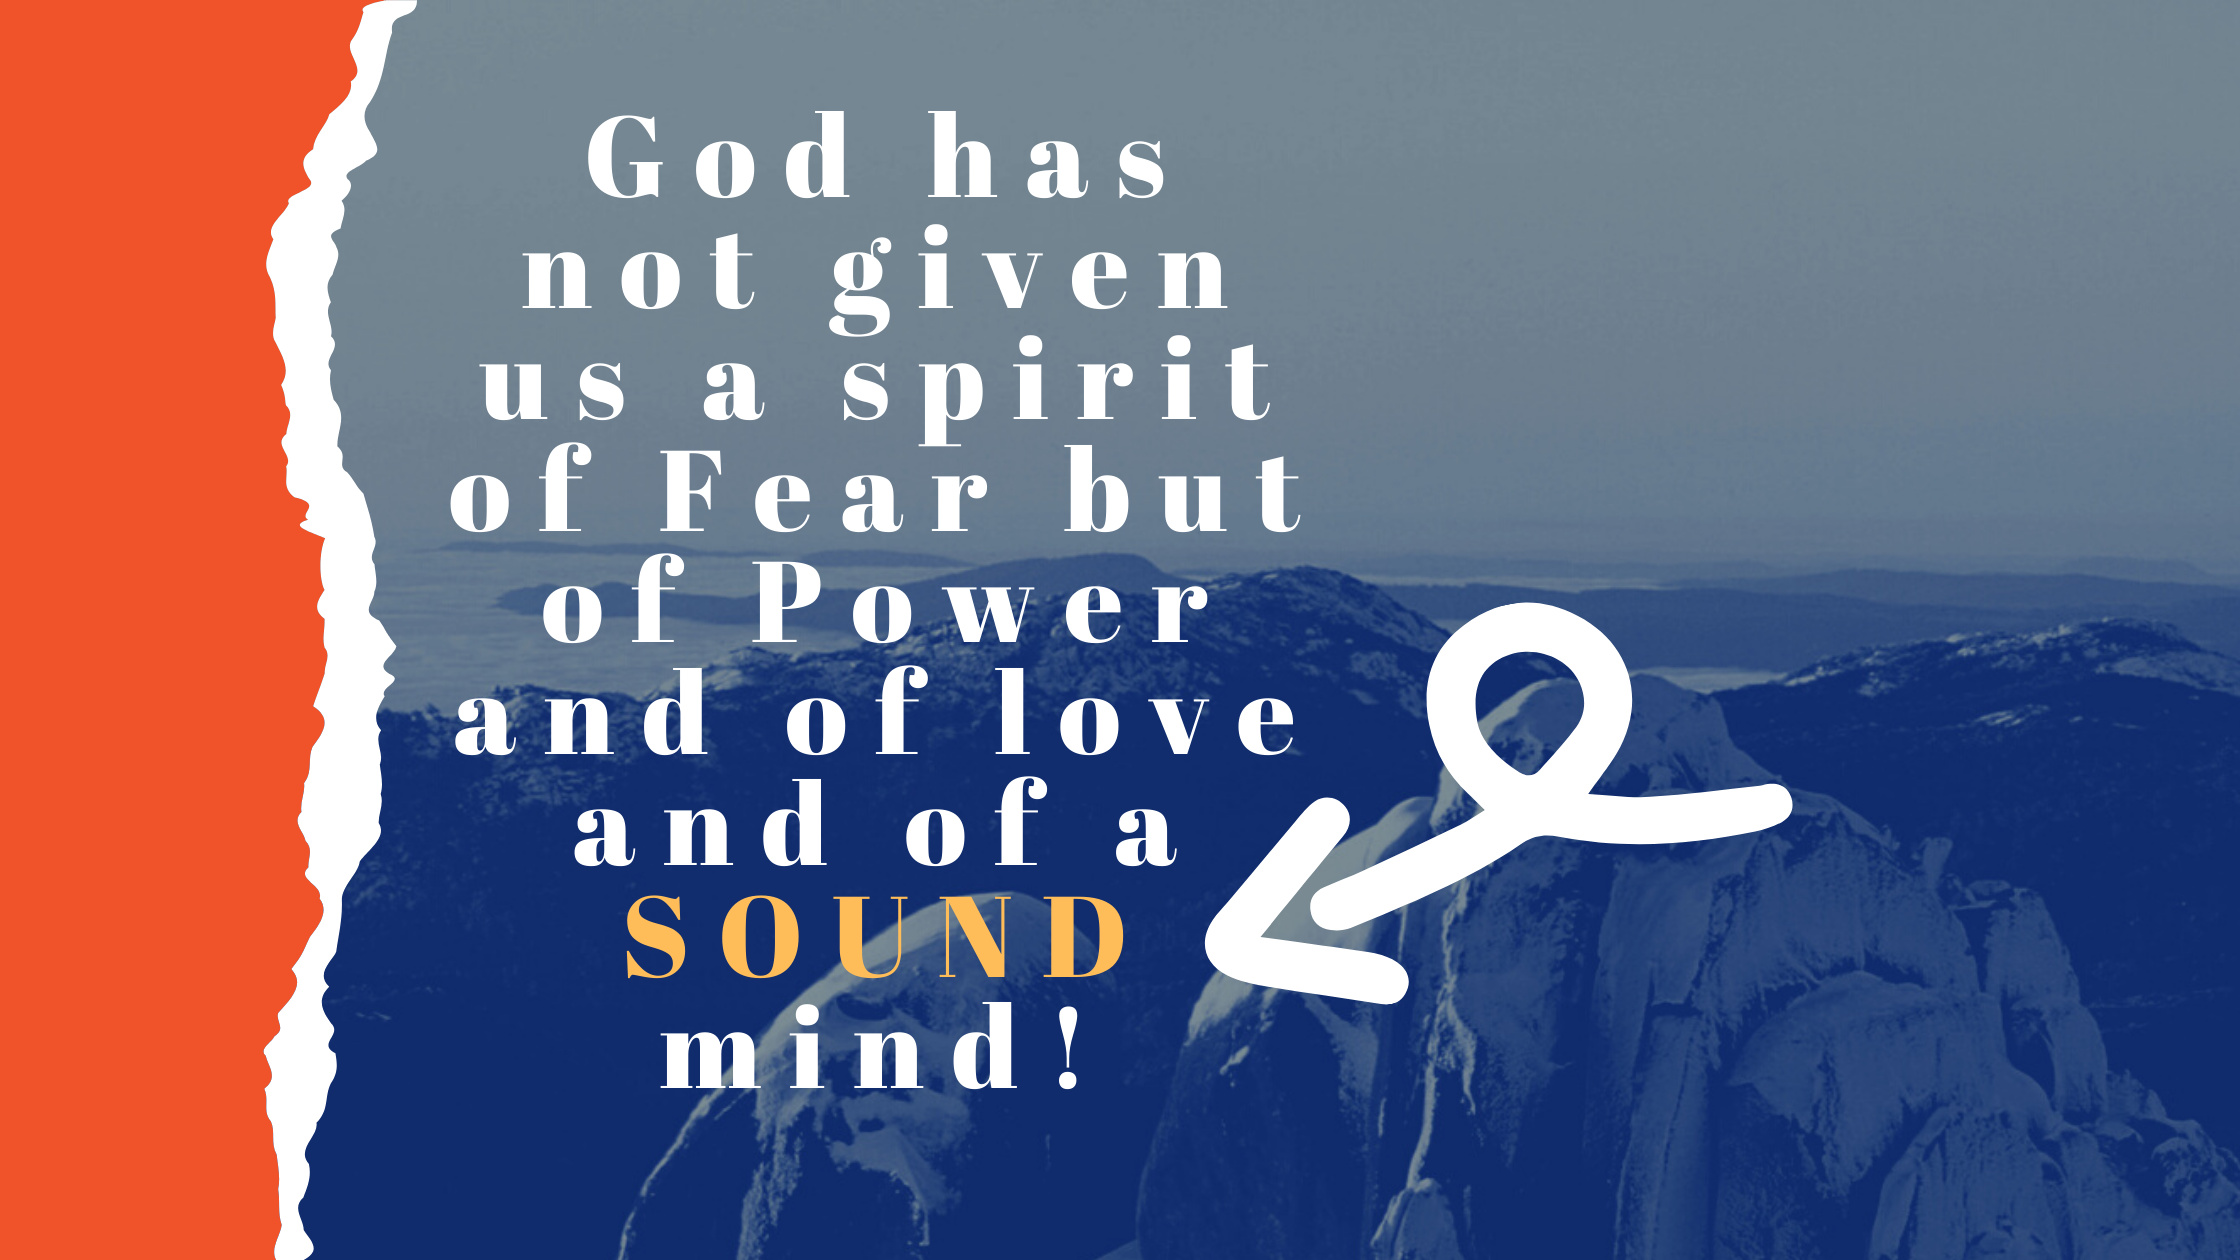 “GOD has not given us a spirit of FEAR but of power and of love and of a sound mind!”